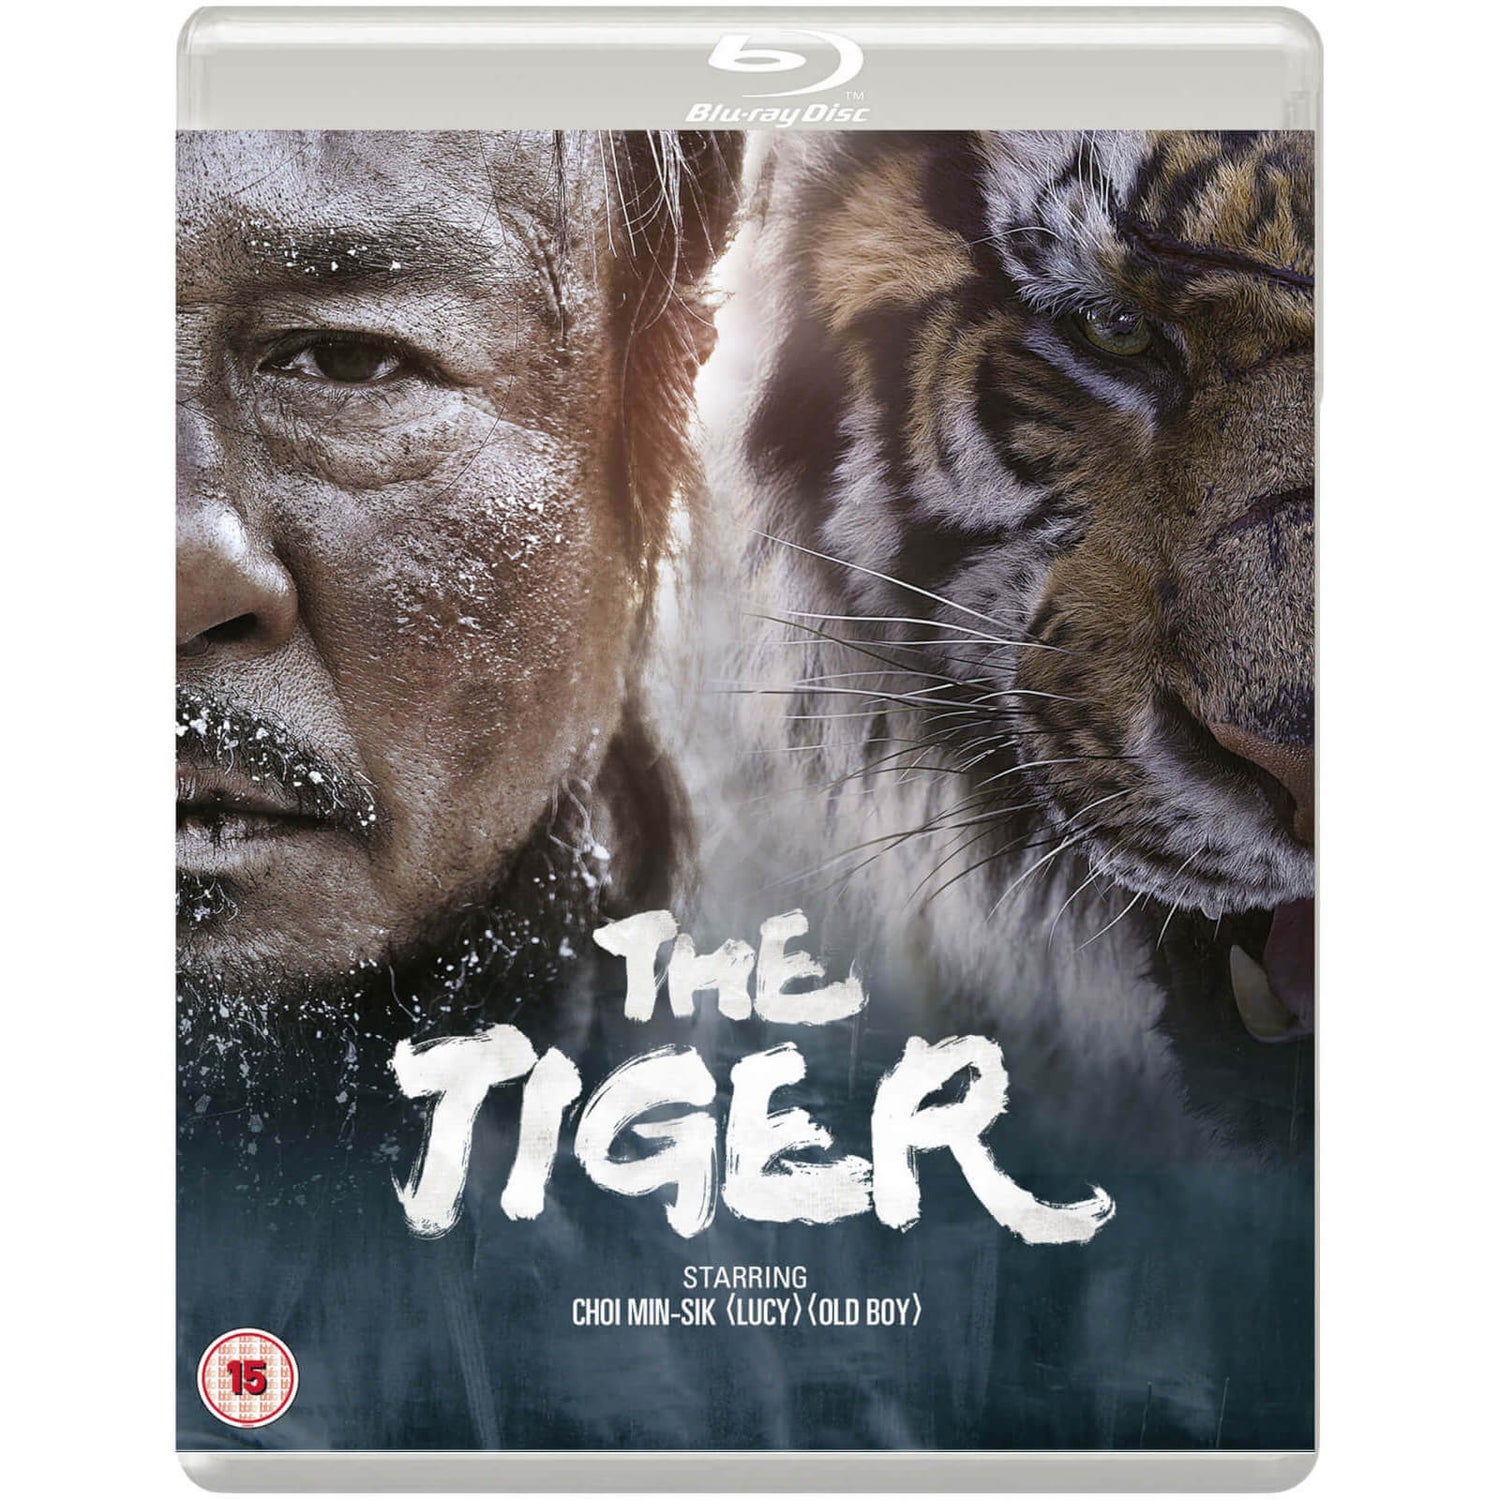 The Tijger: An Old Hunter's Tale